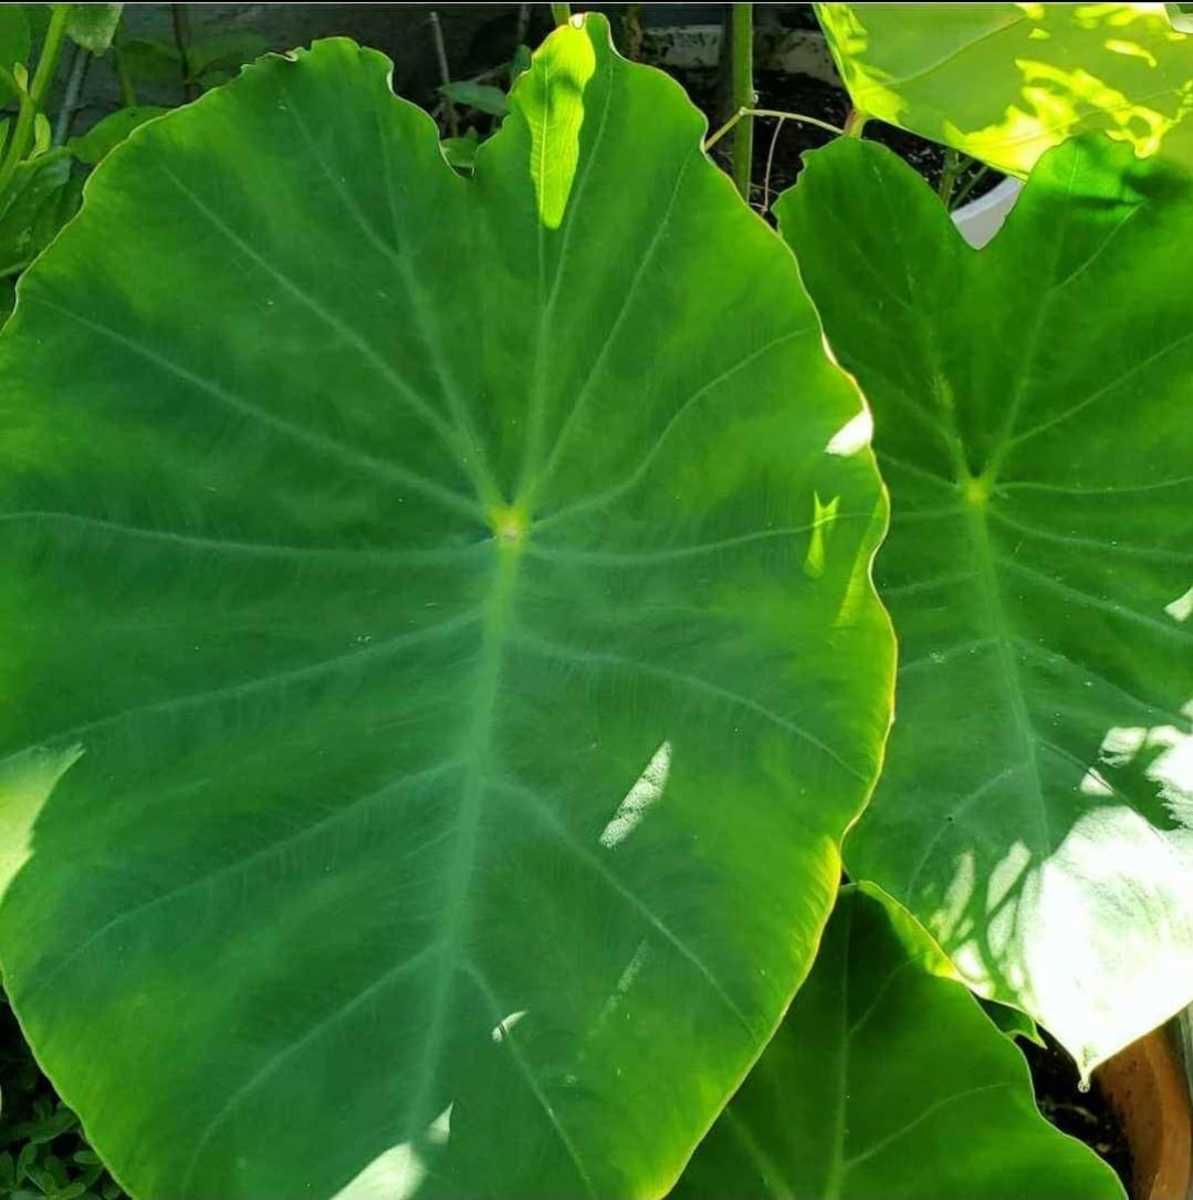 Growing, Consuming Taro and How to Properly Prepare the Stems for Cooking